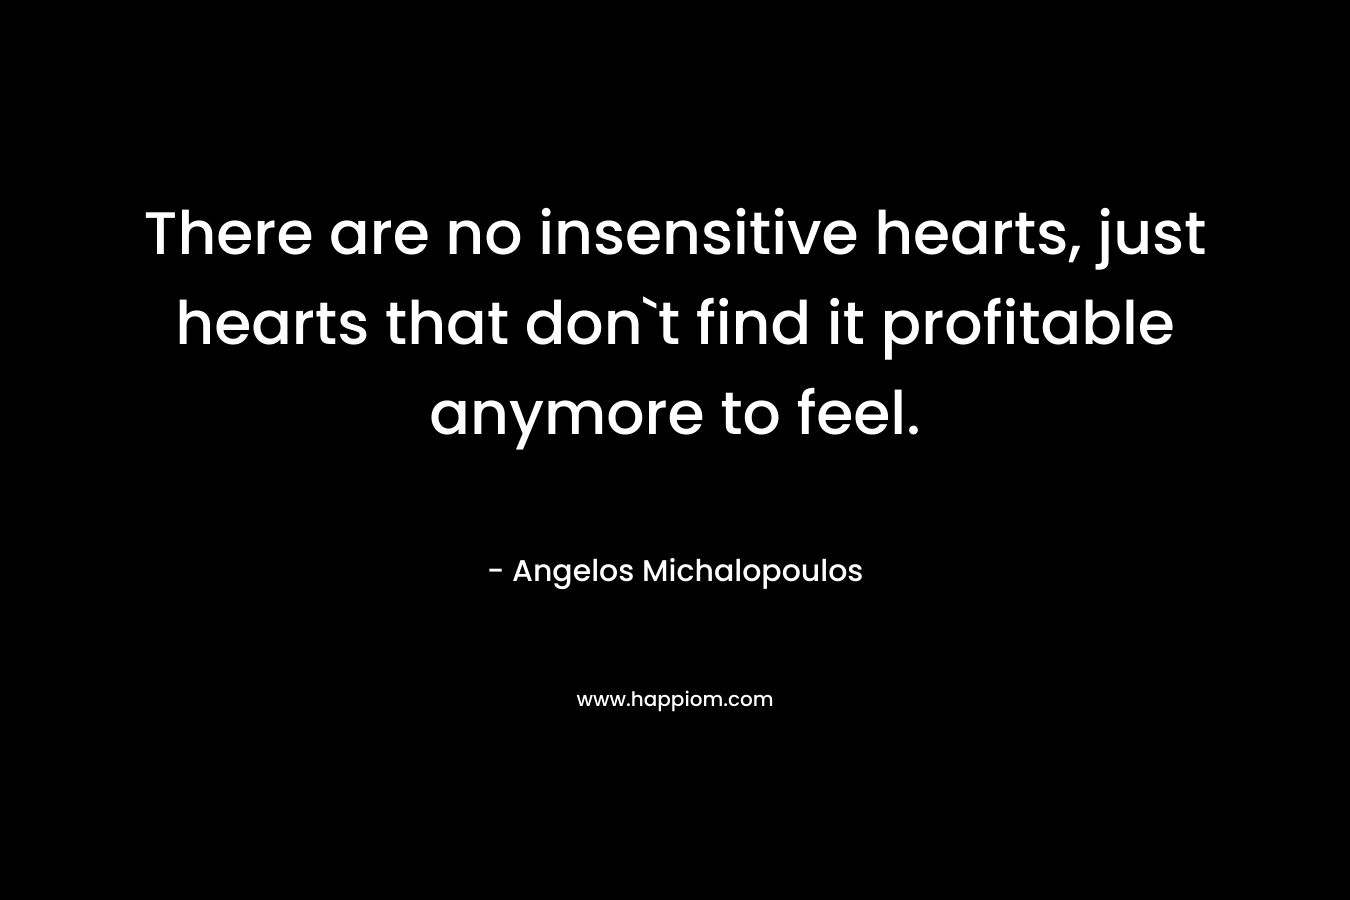 There are no insensitive hearts, just hearts that don`t find it profitable anymore to feel.